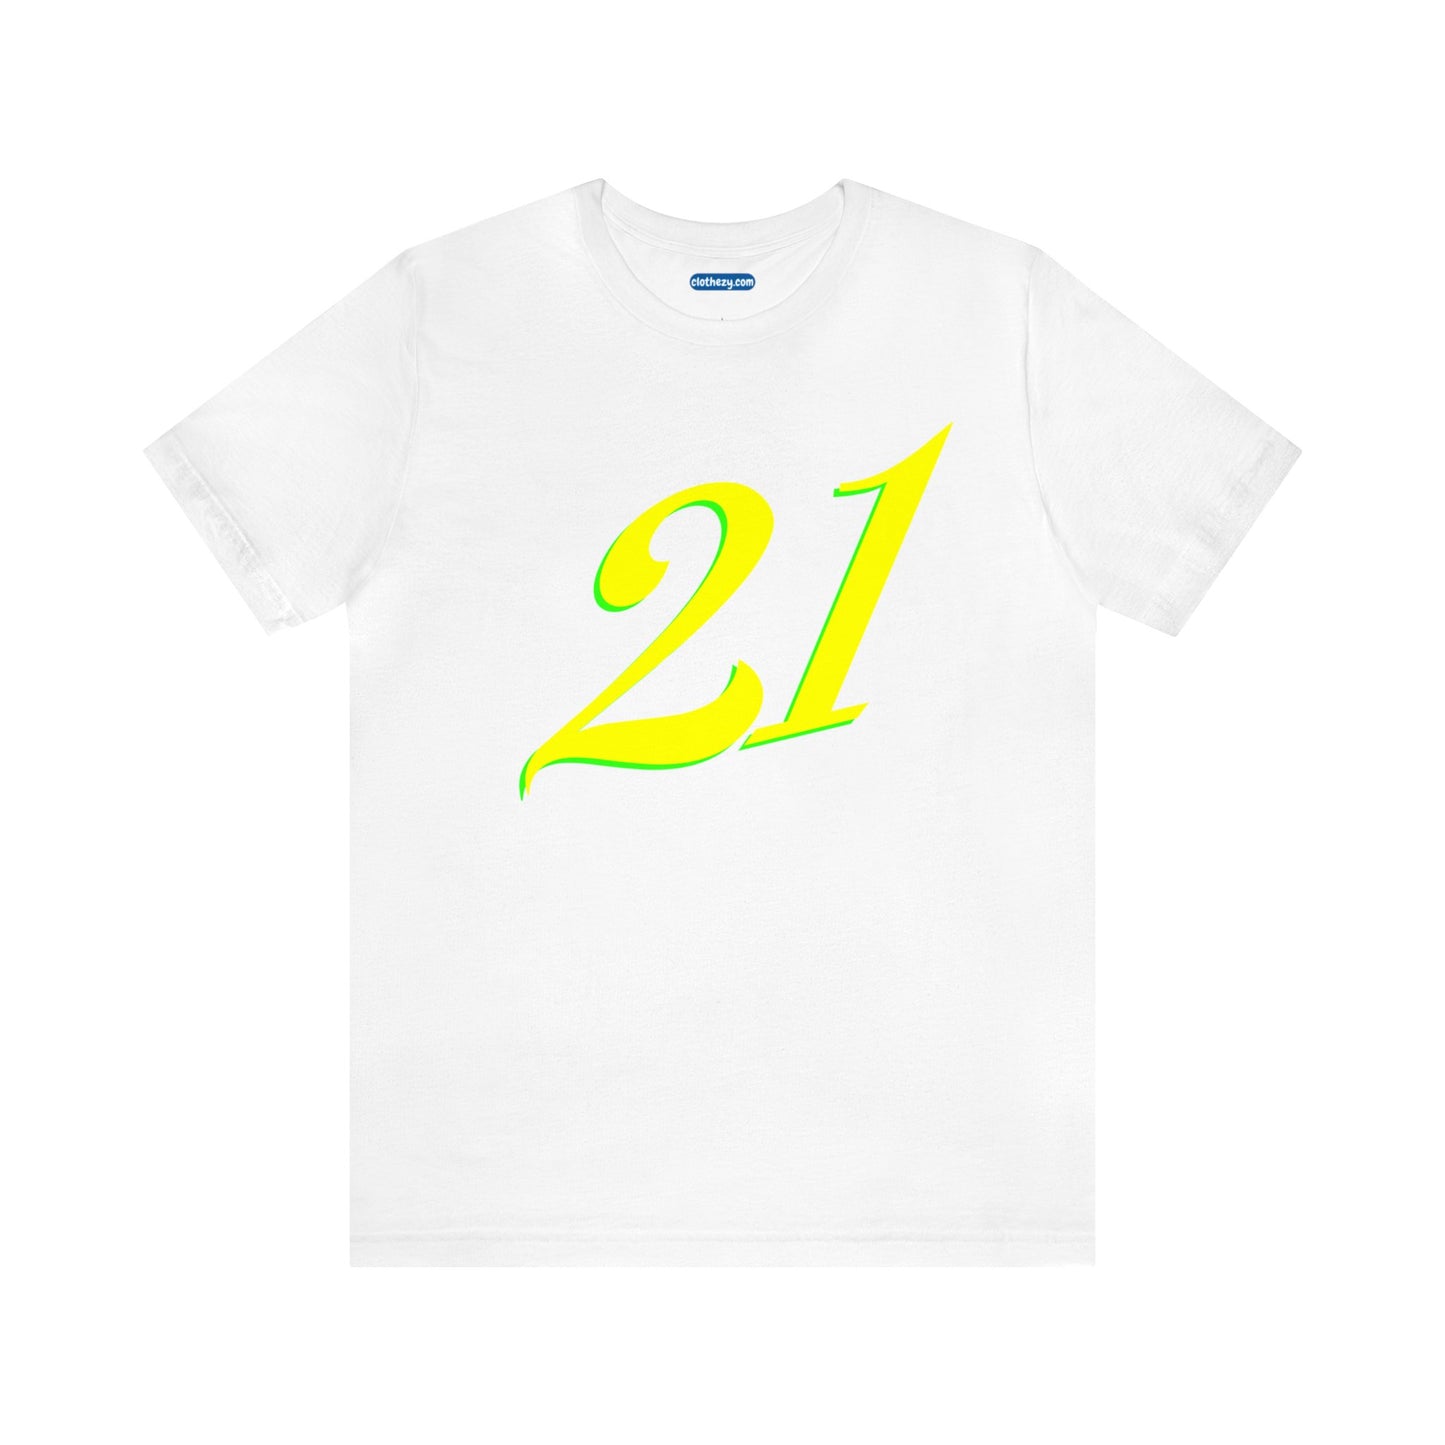 Number 21 Design - Soft Cotton Tee for birthdays and celebrations, Gift for friends and family, Multiple Options by clothezy.com in White Size Small - Buy Now